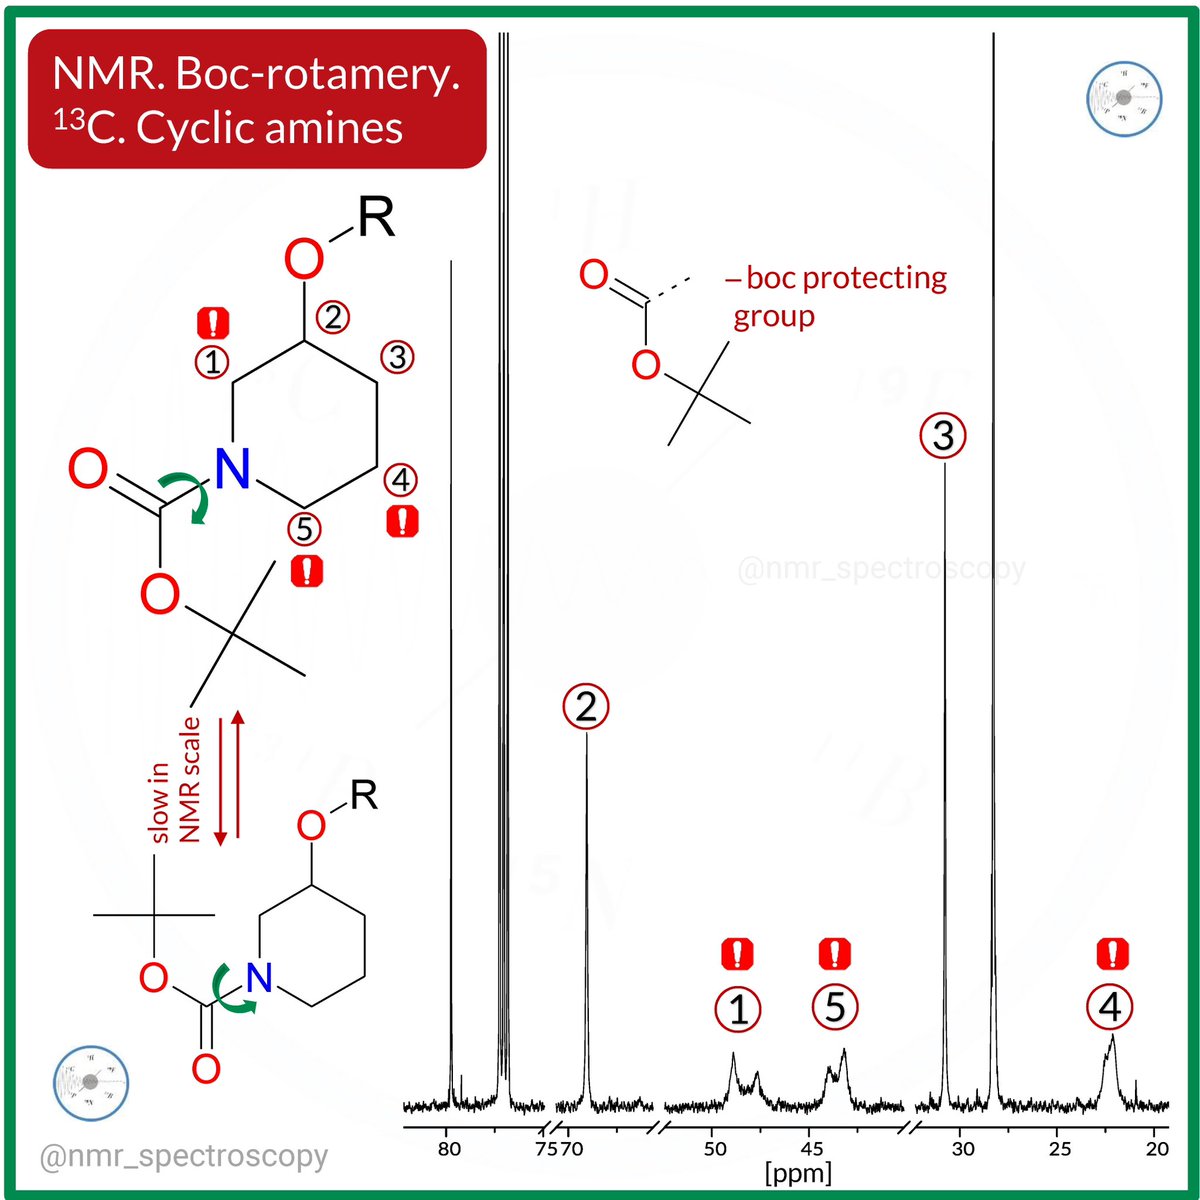 ⁉️Do you frequently use Boc protecting group? Check out this example of its impact on rotamery in cyclic amines using 13C NMR spectroscopy!
✏️📝🧪
#nmr #nuclearmagneticresonance #nmrchat #organicchemistry #chemistry #spectroscopy #farma #medicalchemistry #chemie #quimica